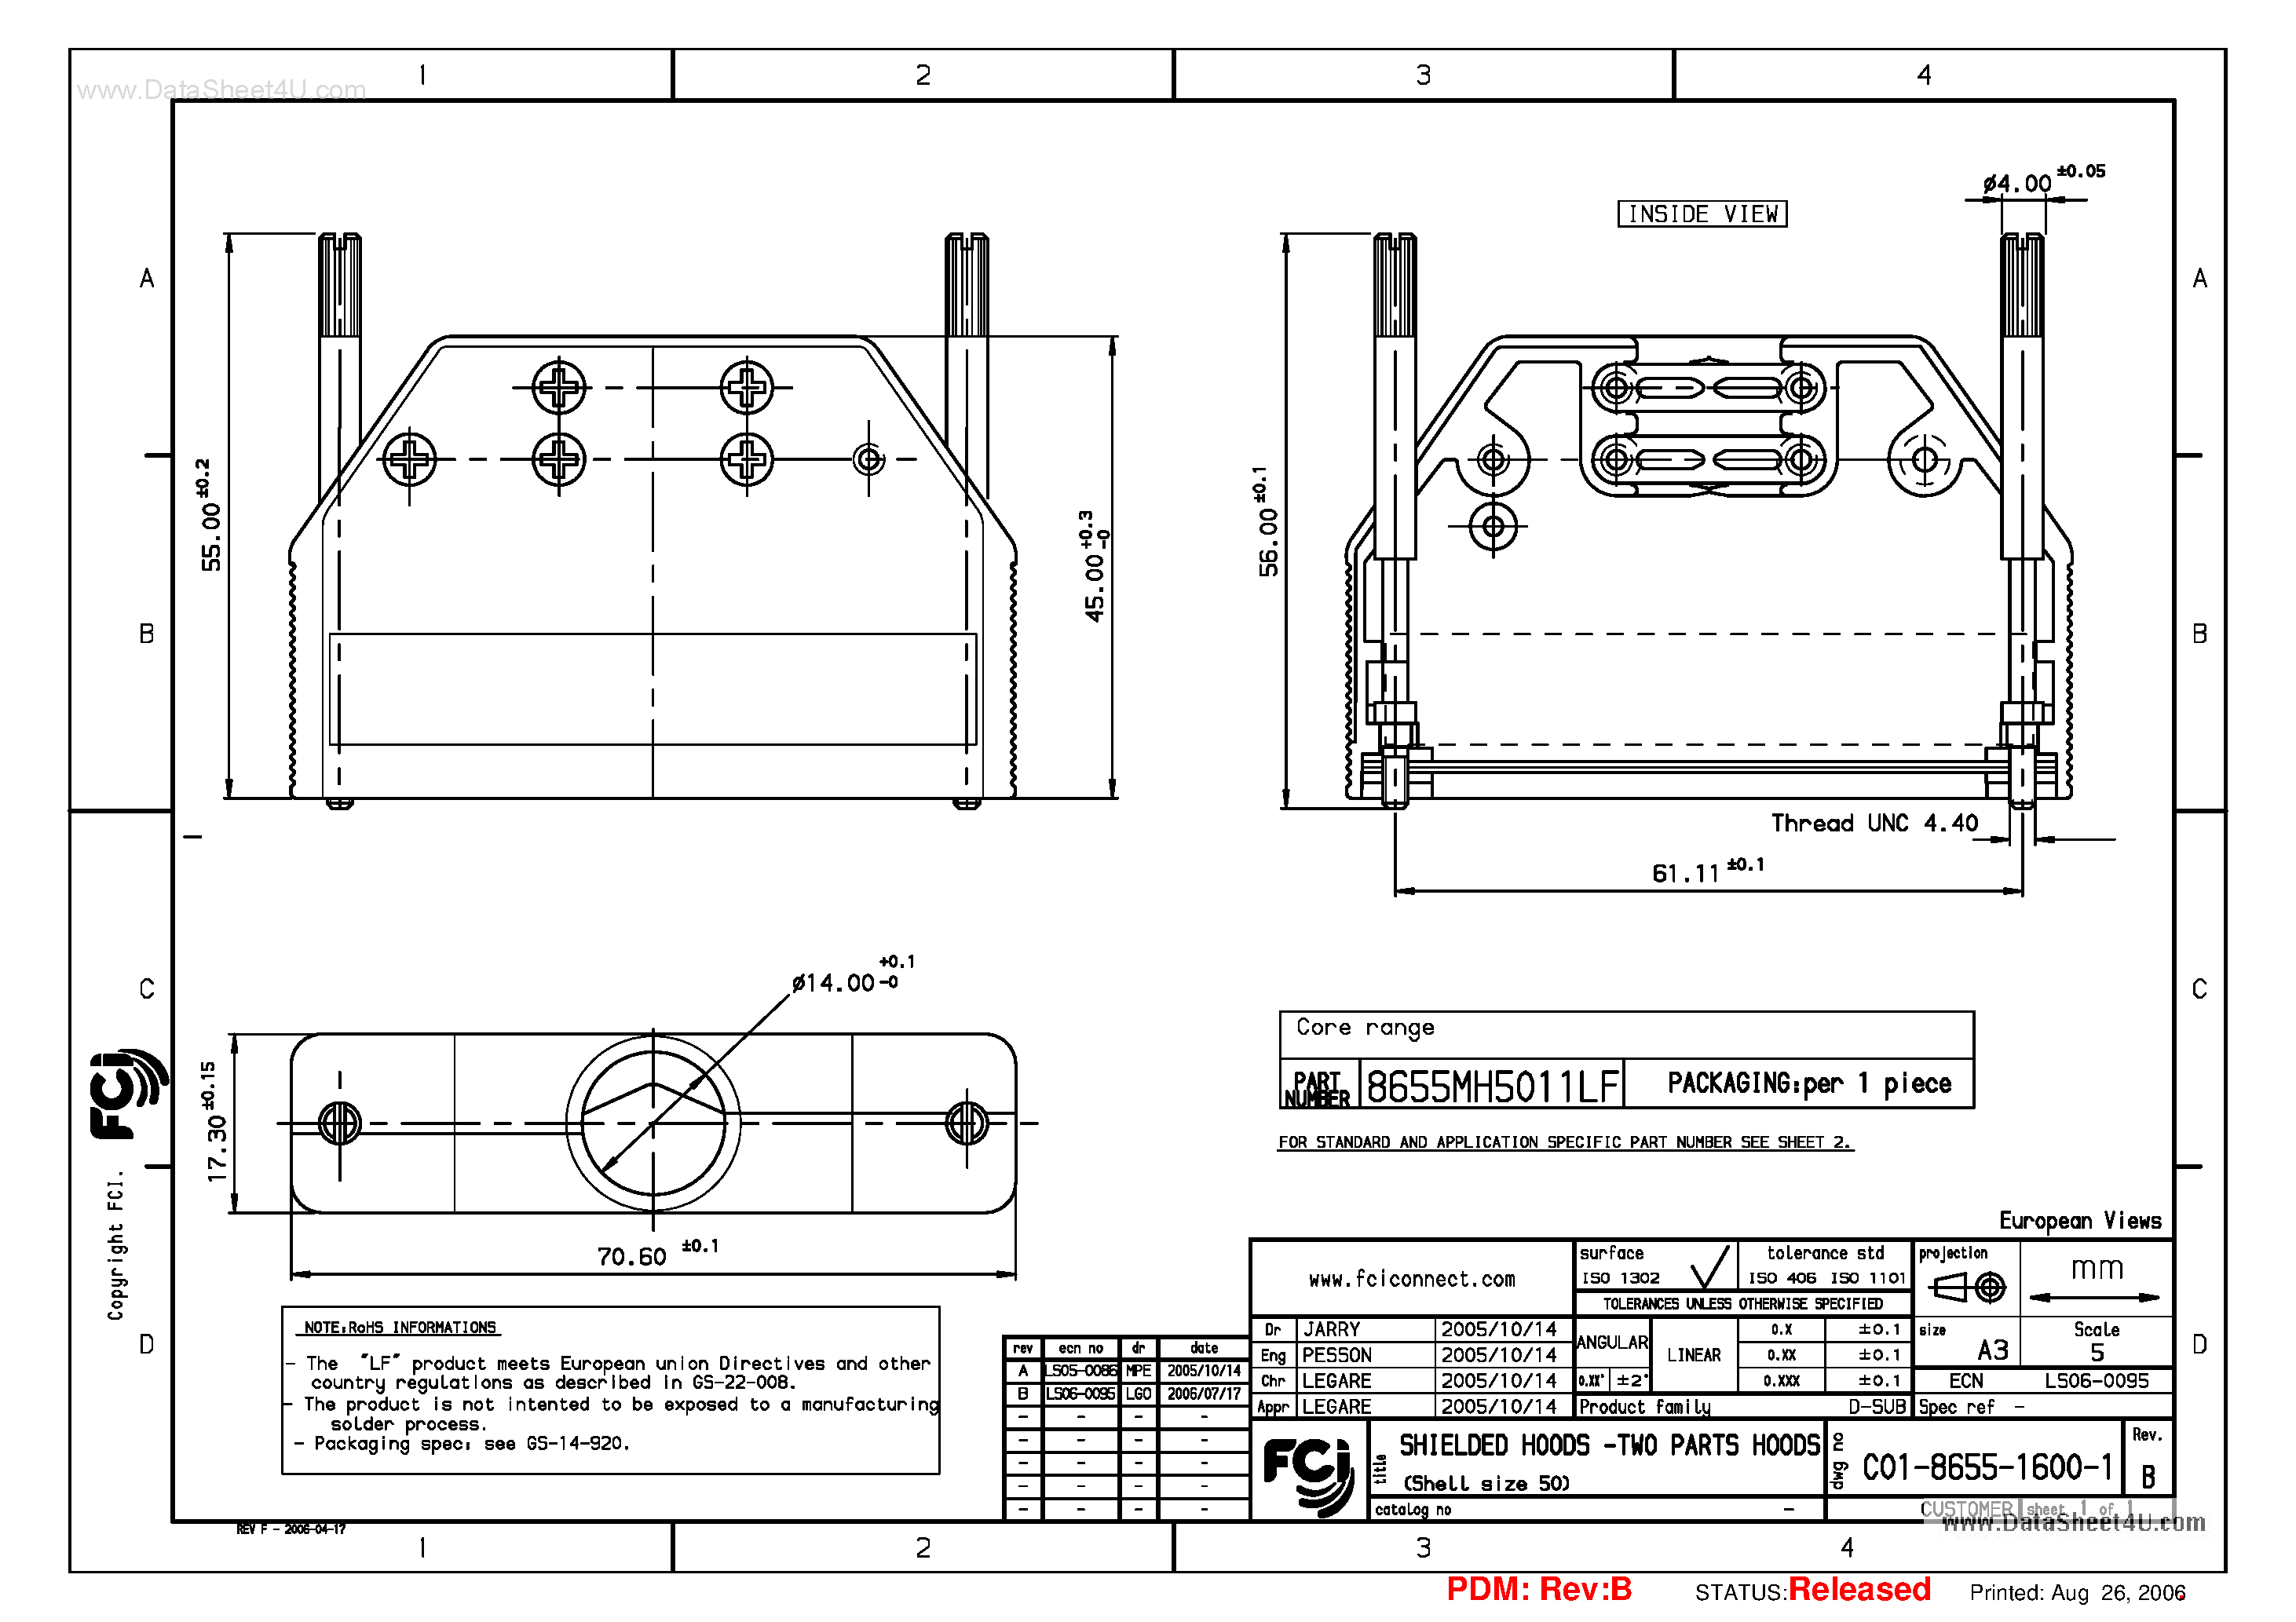 Datasheet 8655MH5011LF - SHIELDED HOOD5 - TWO PARTS HOODS page 1